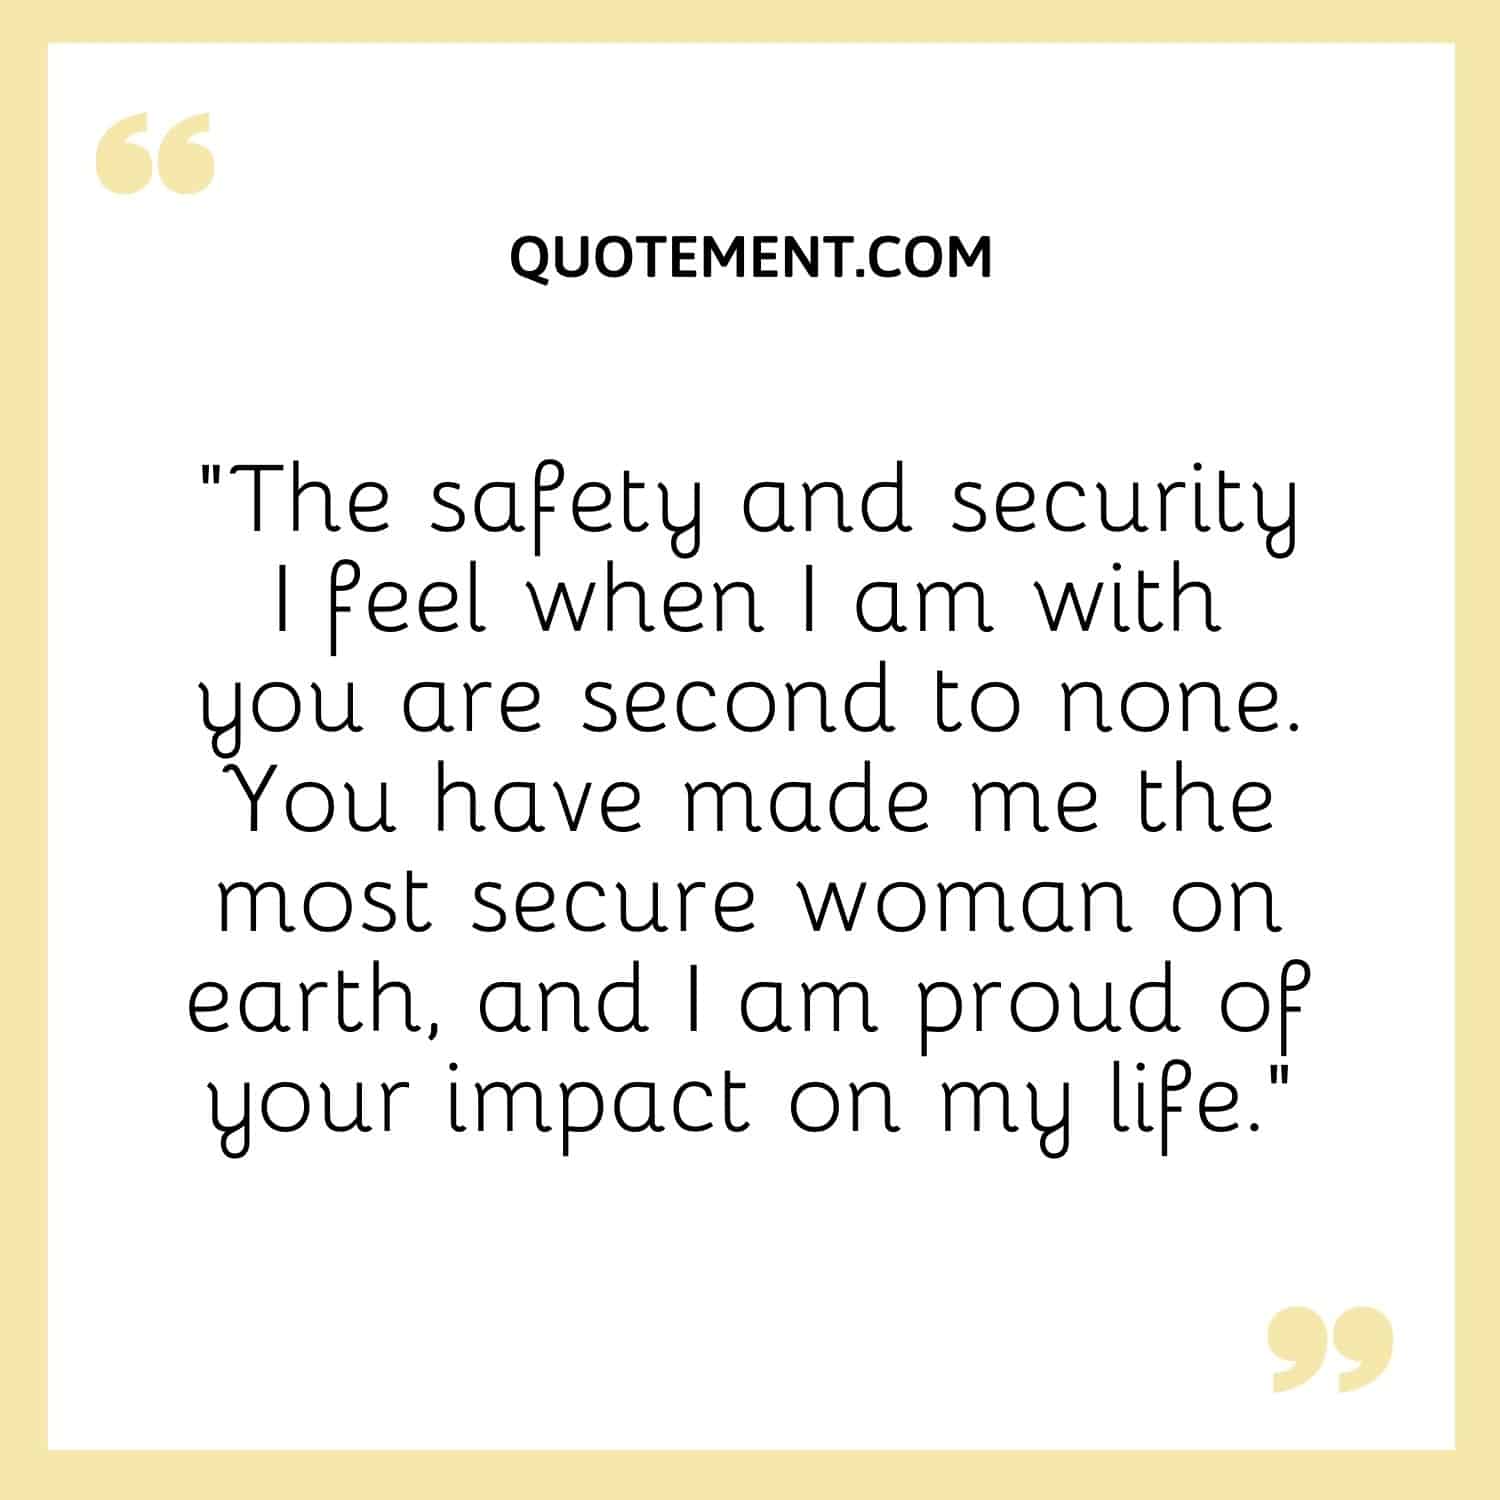 “The safety and security I feel when I am with you are second to none. You have made me the most secure woman on earth, and I am proud of your impact on my life.”